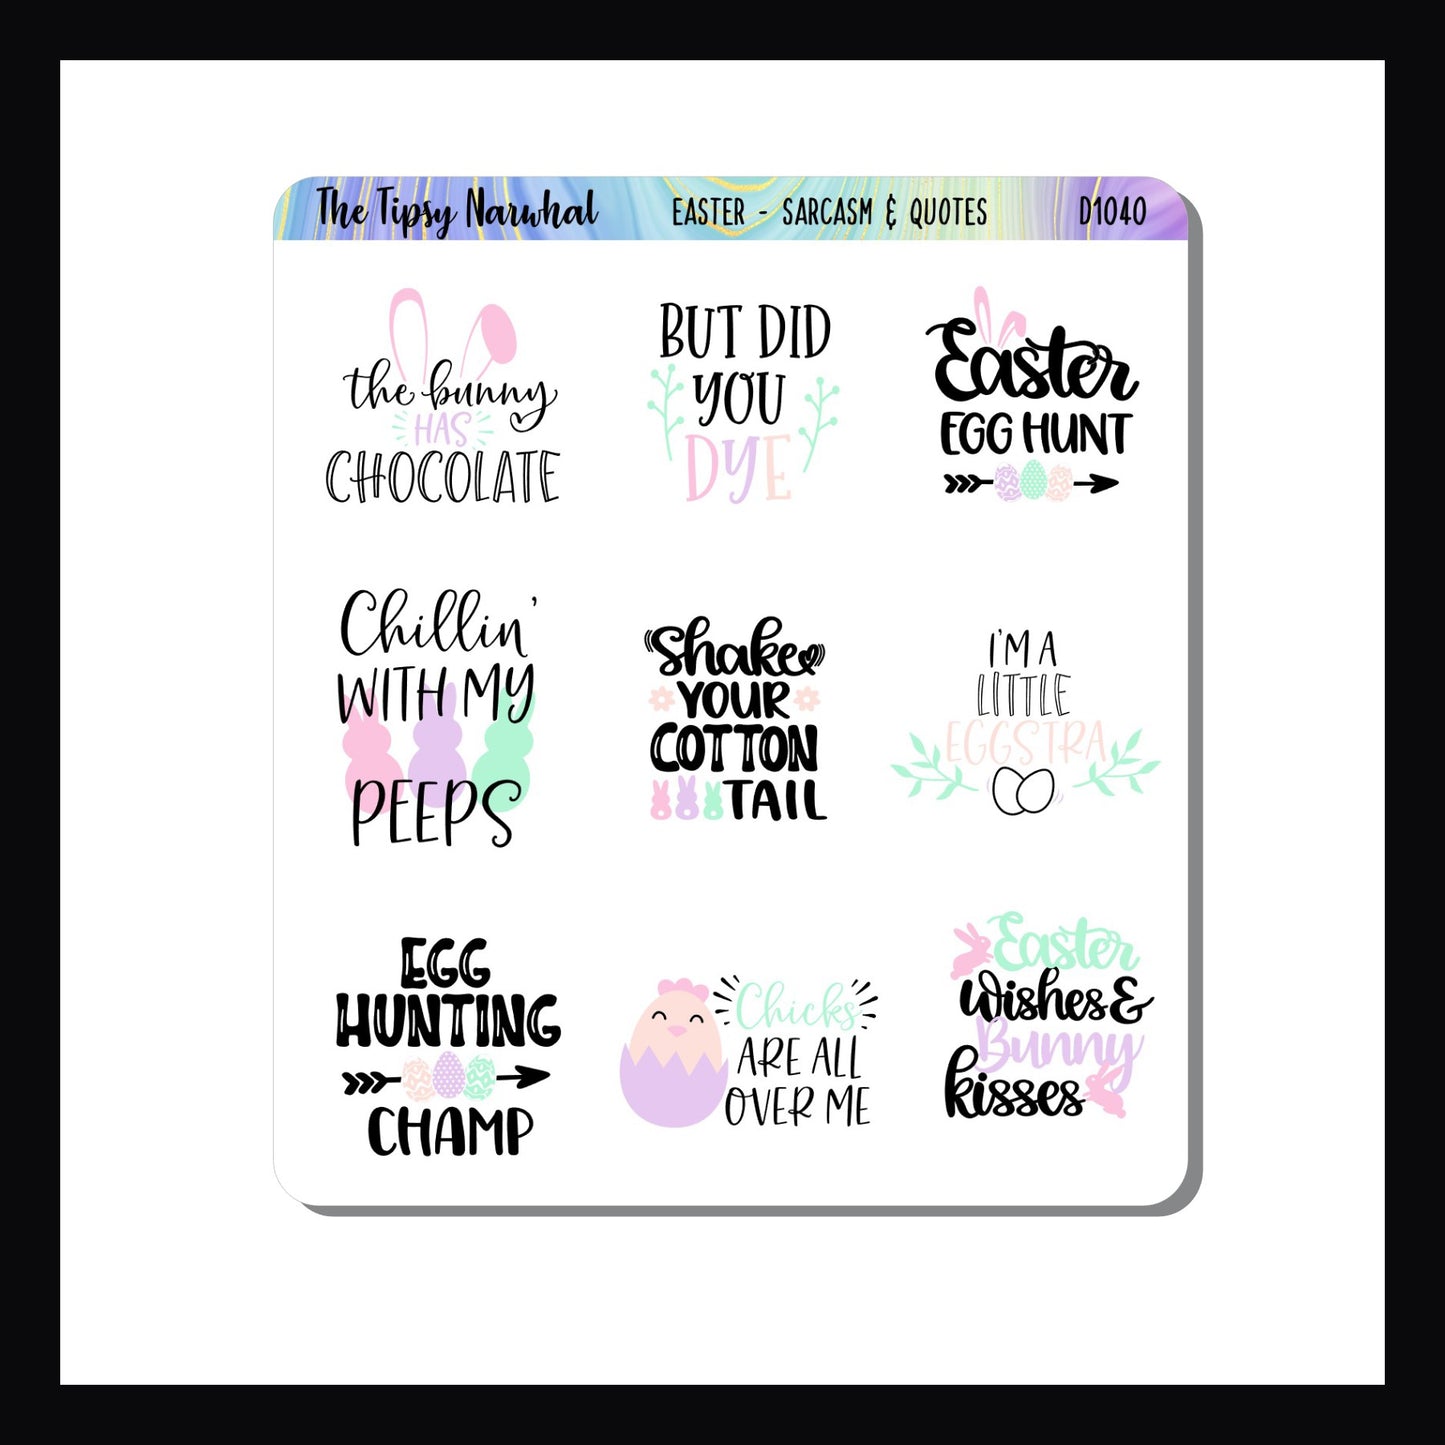 Easter Sarcasm & Quotes Sticker Sheet